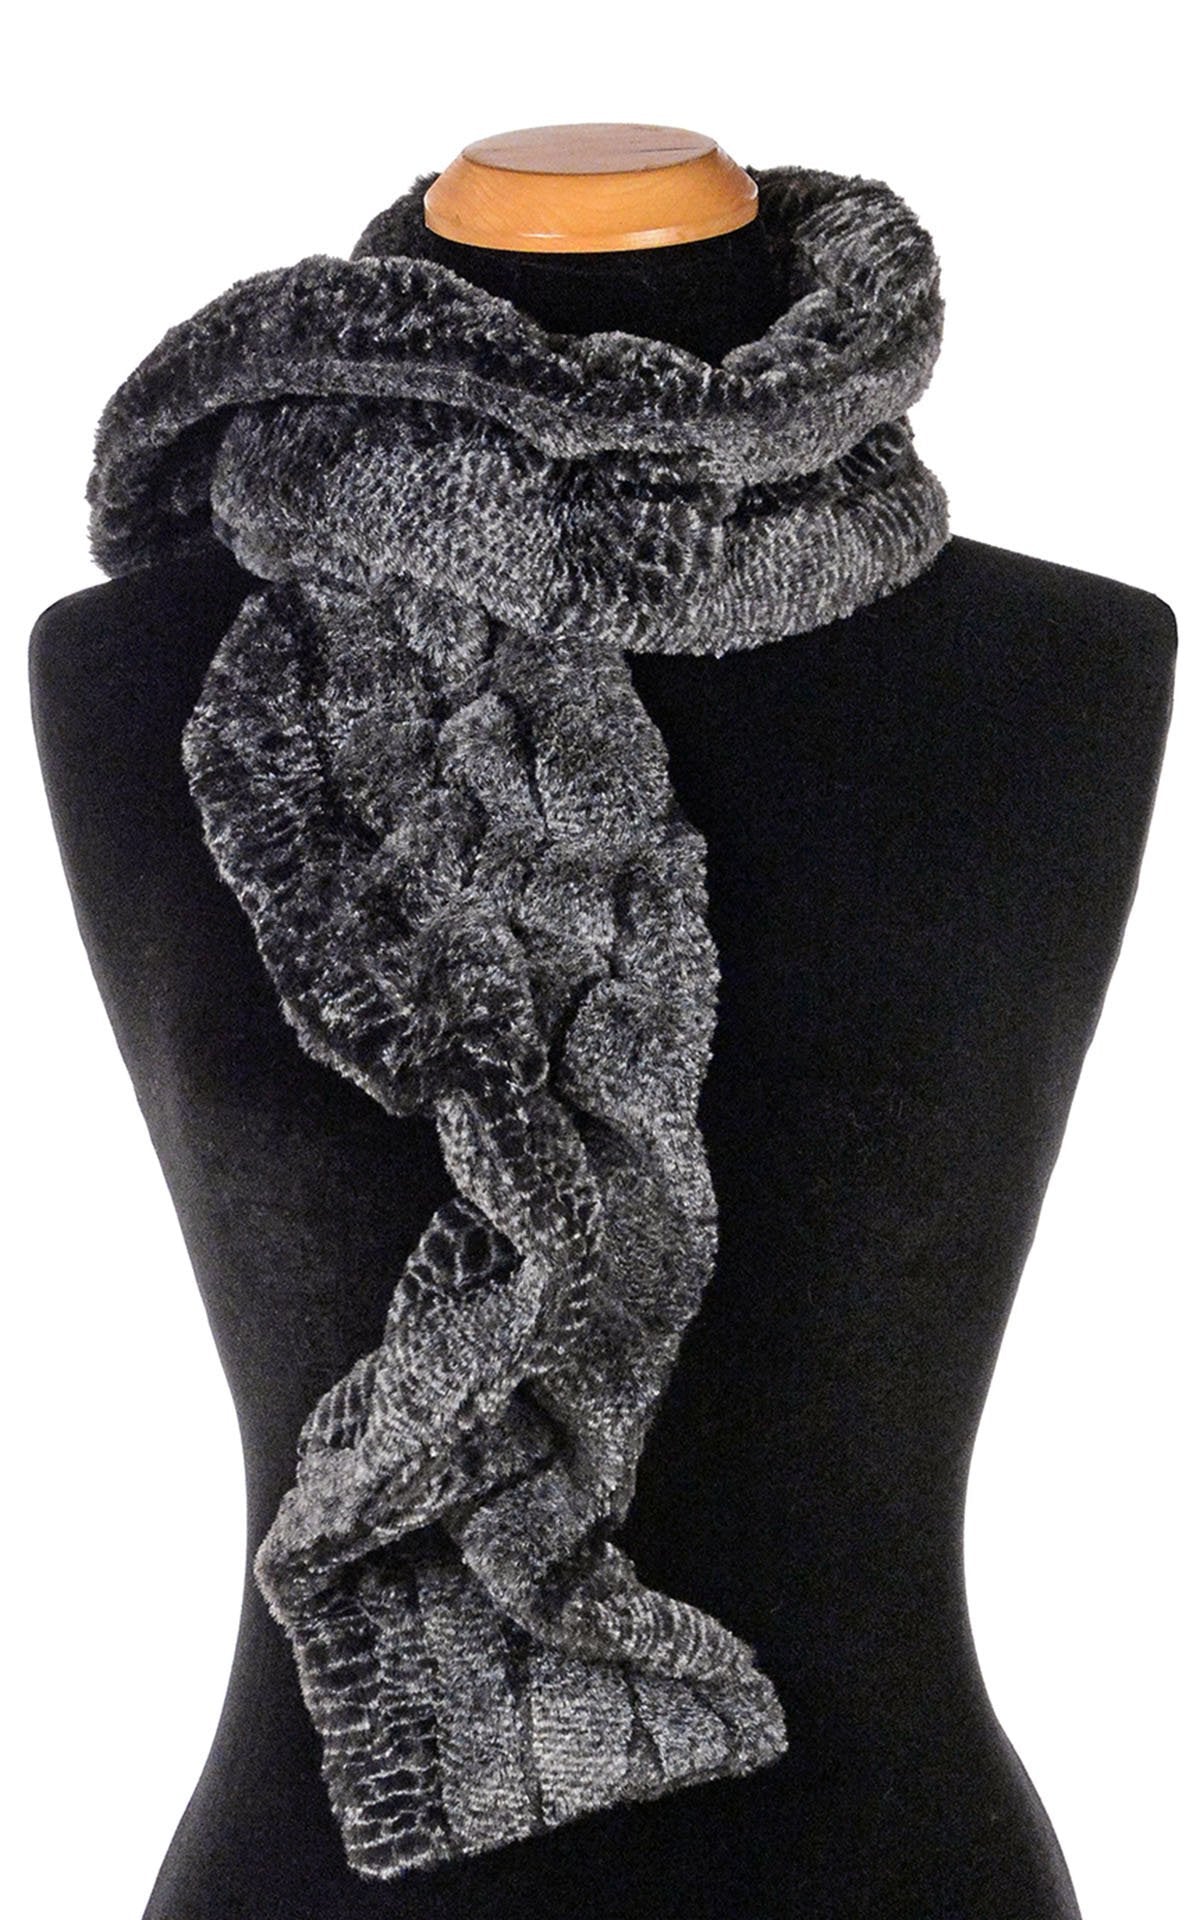 Scrunchy Scarf - Luxury Faux Fur in Rattlesnake Ridge - Sold Out!